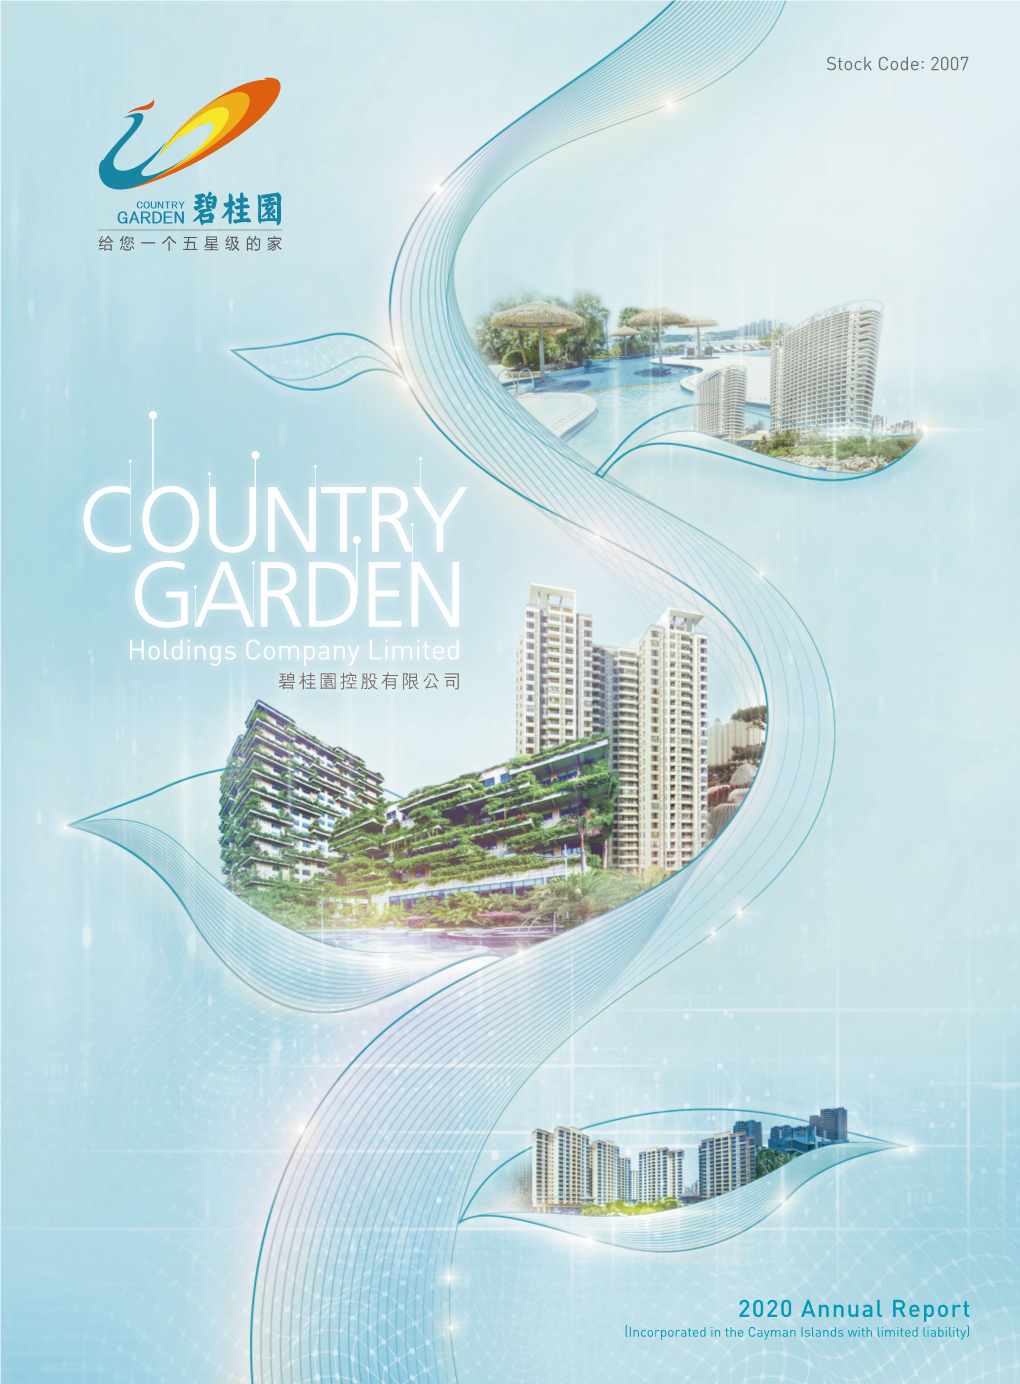 2020 Annual Report (Incorporated in the Cayman Islands with Limited Liability) WHAT IS COUNTRY GARDEN?